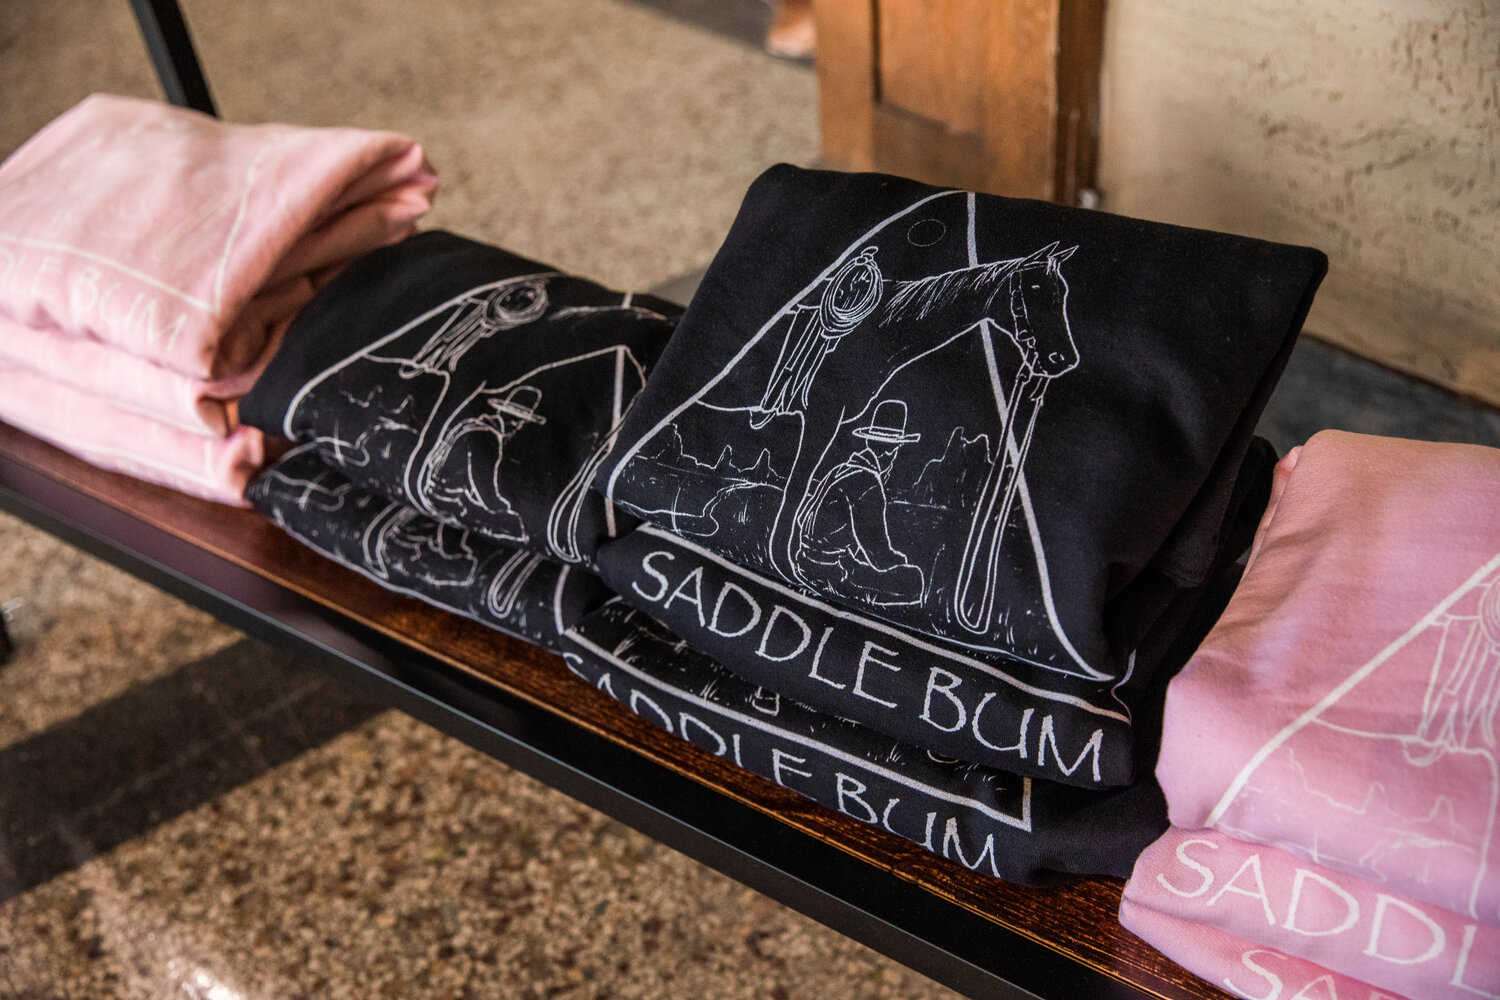 The Saddle Bum logo is displayed on hoodies in downtown Centralia on Monday, May 8.